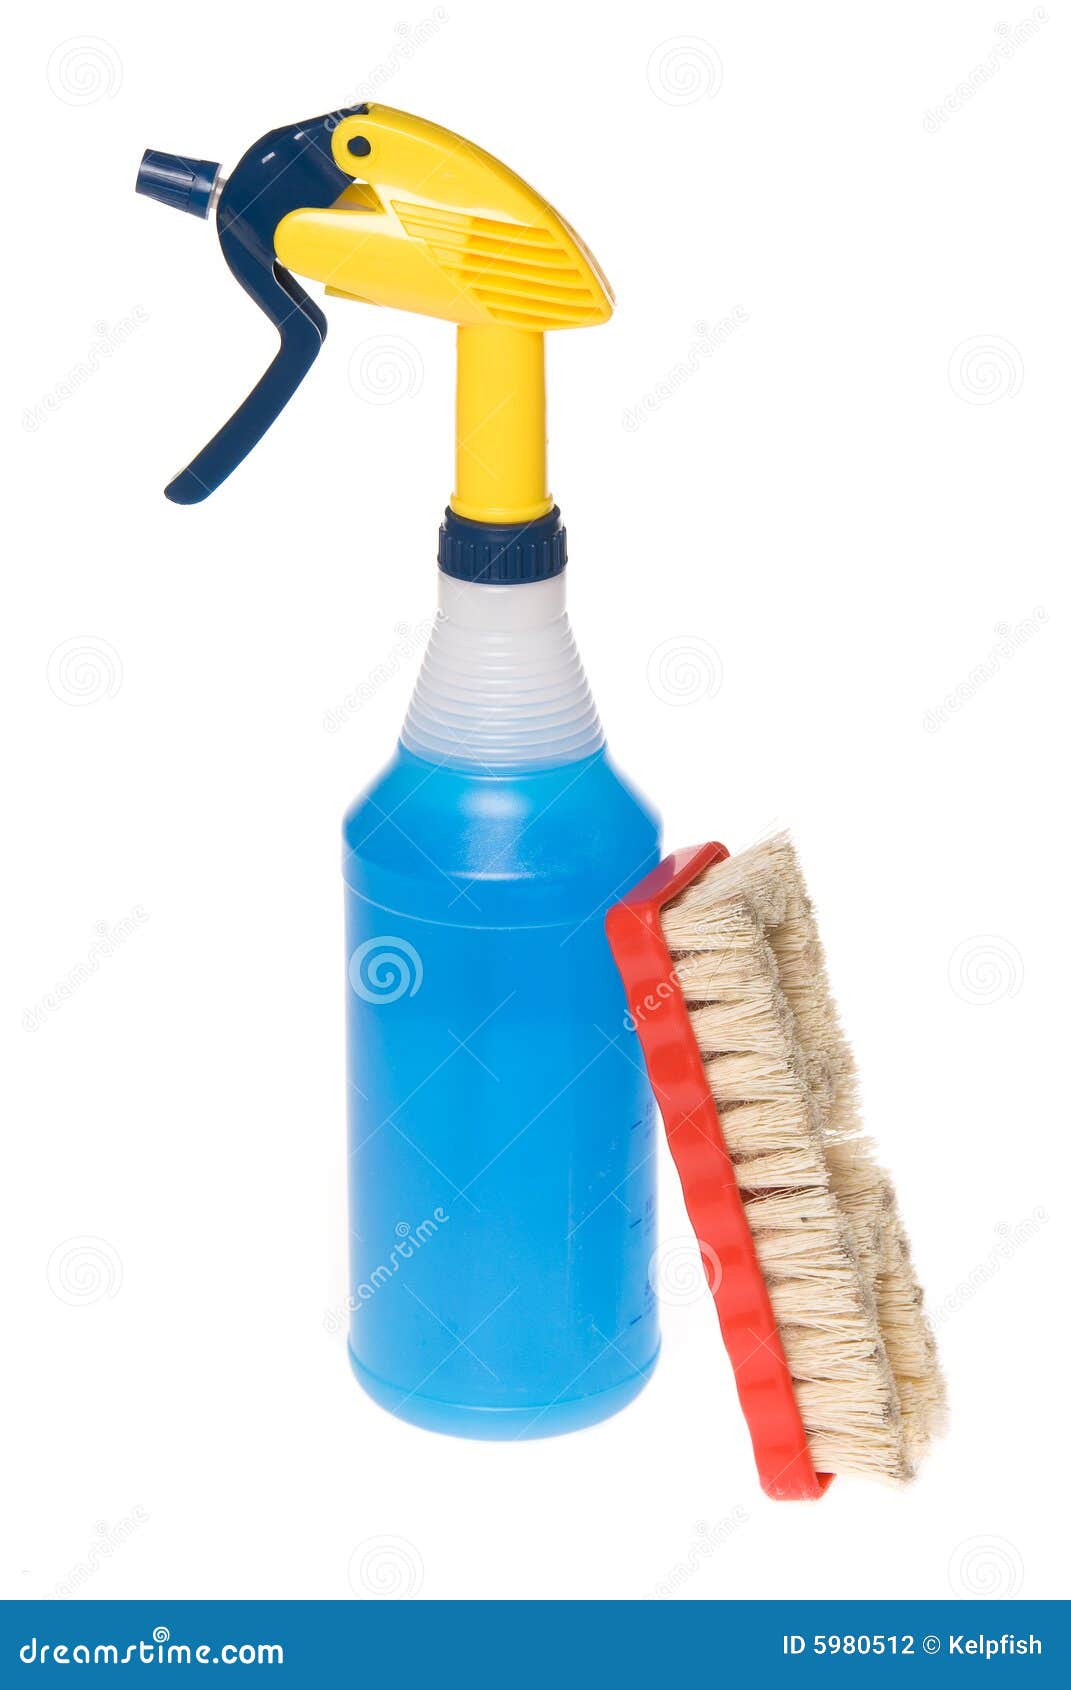 spray bottle of cleaner with brush